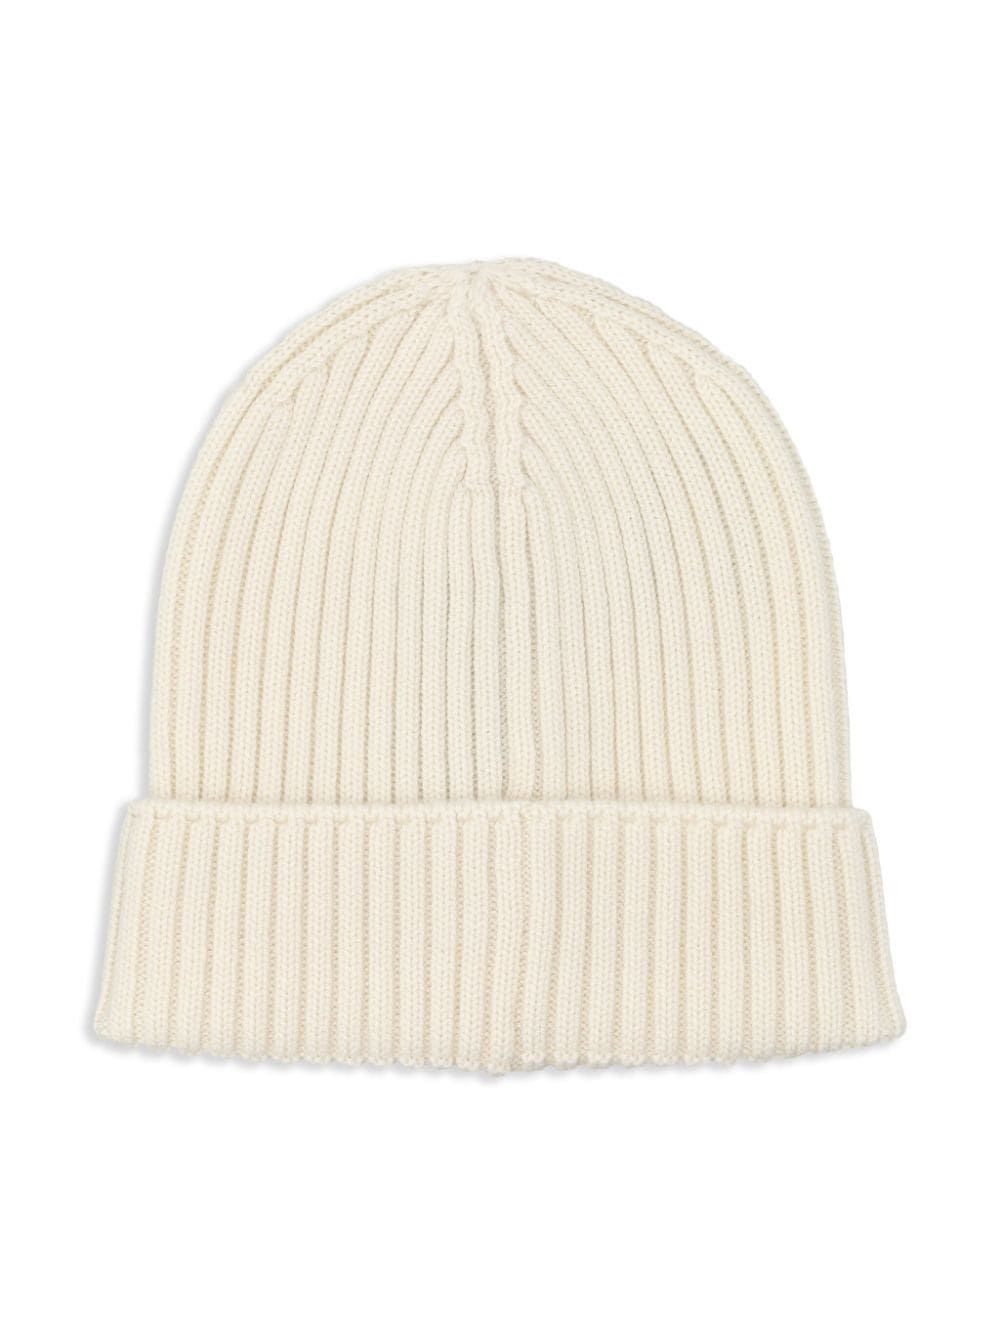 White wool hat for girls